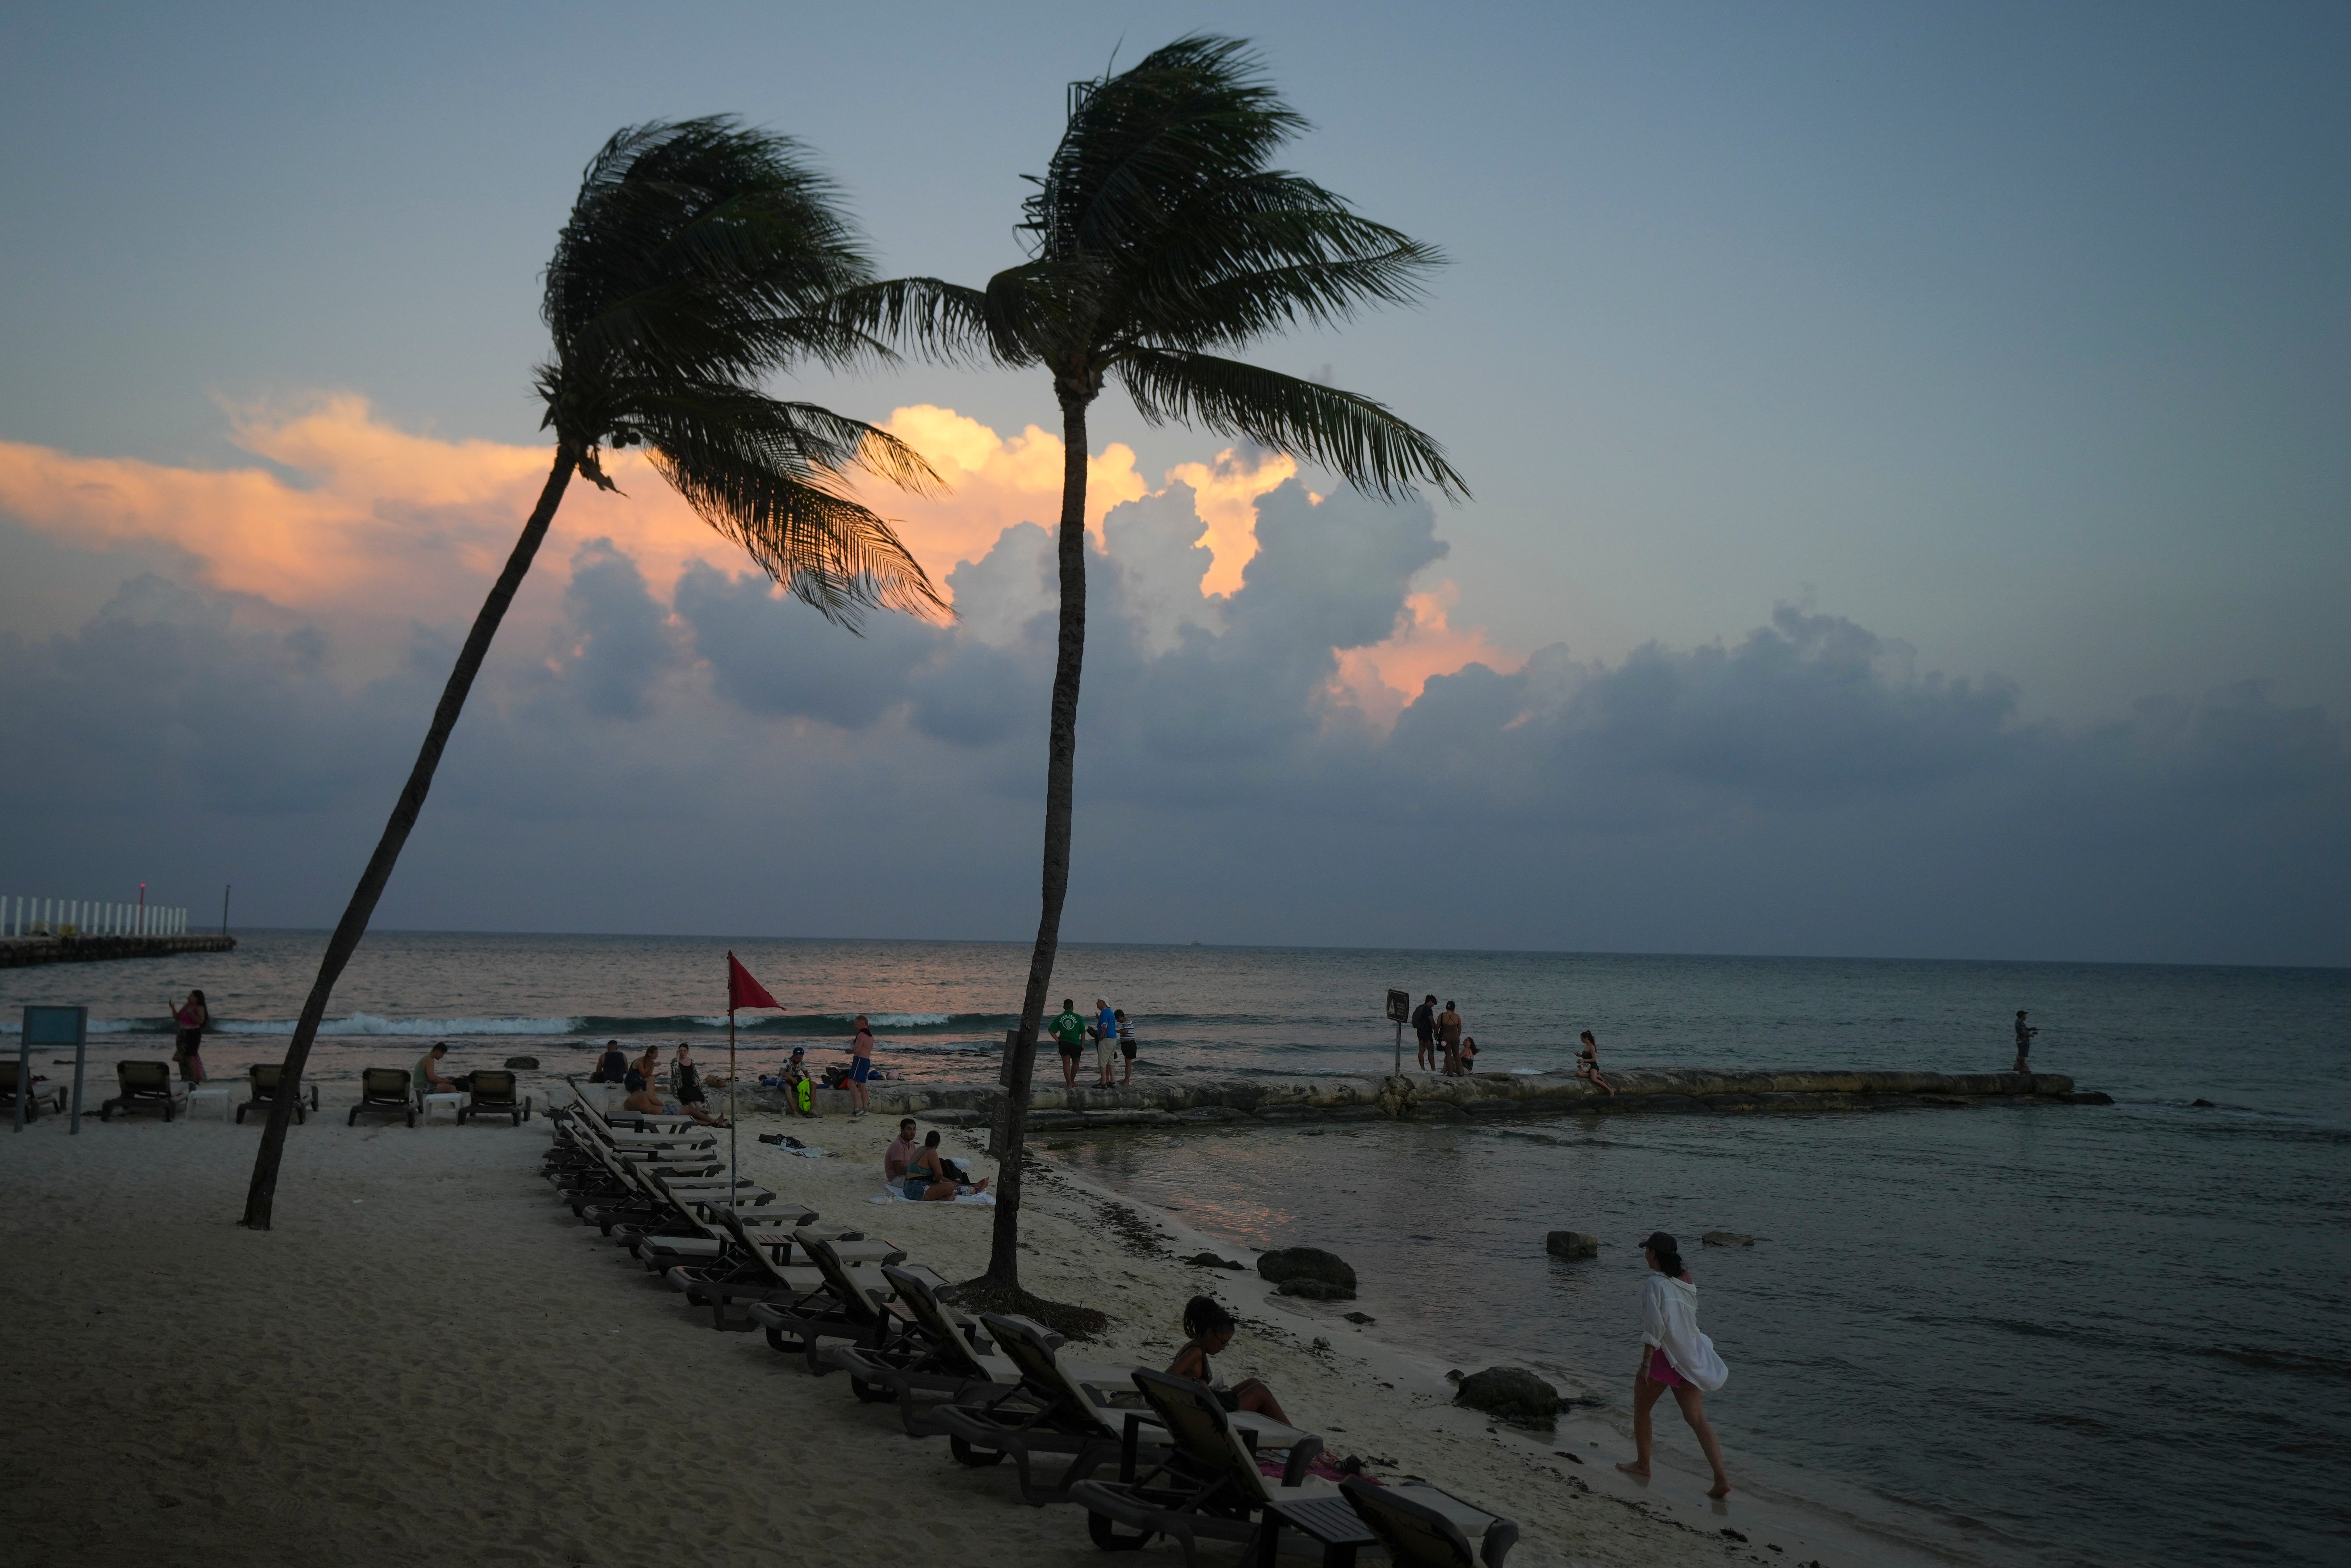 People lounge on the beach as the sun sets ahead of Hurricane Beryl’s expected arrival, in Playa del Carmen, Mexico